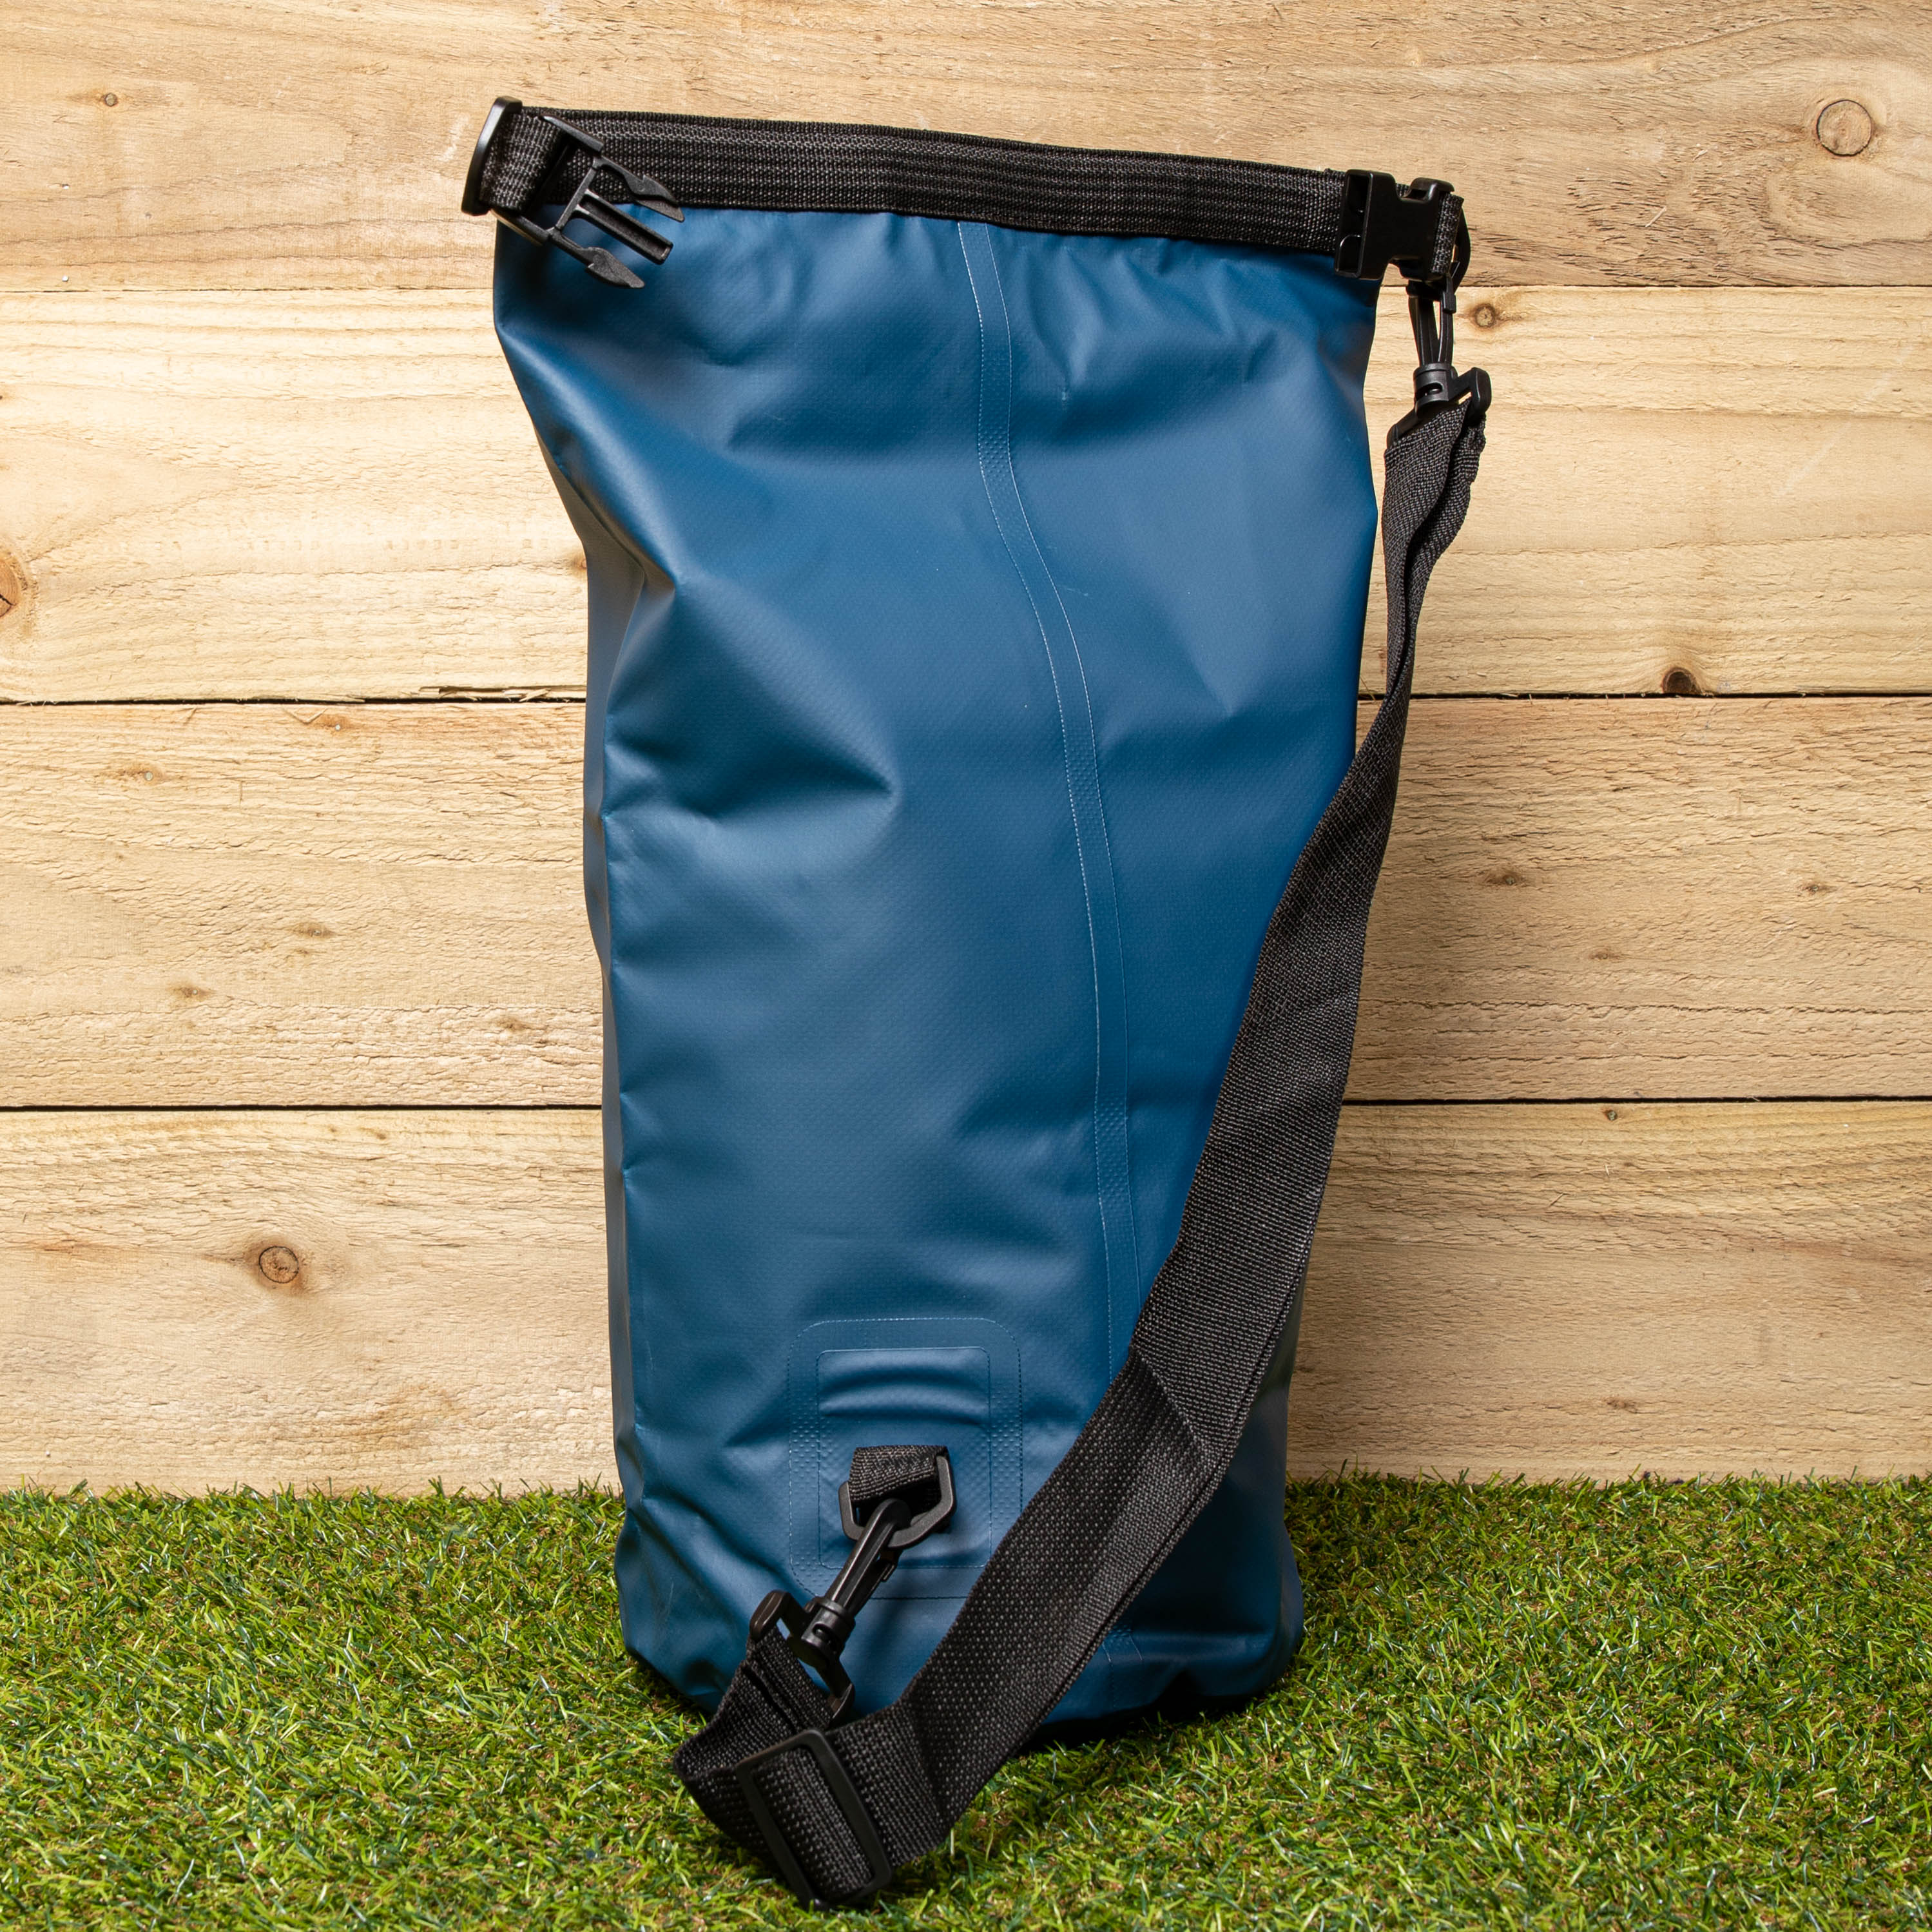 Discovery Adventures 10 Litre Floating Heavy Duty Dry Bag / Sack